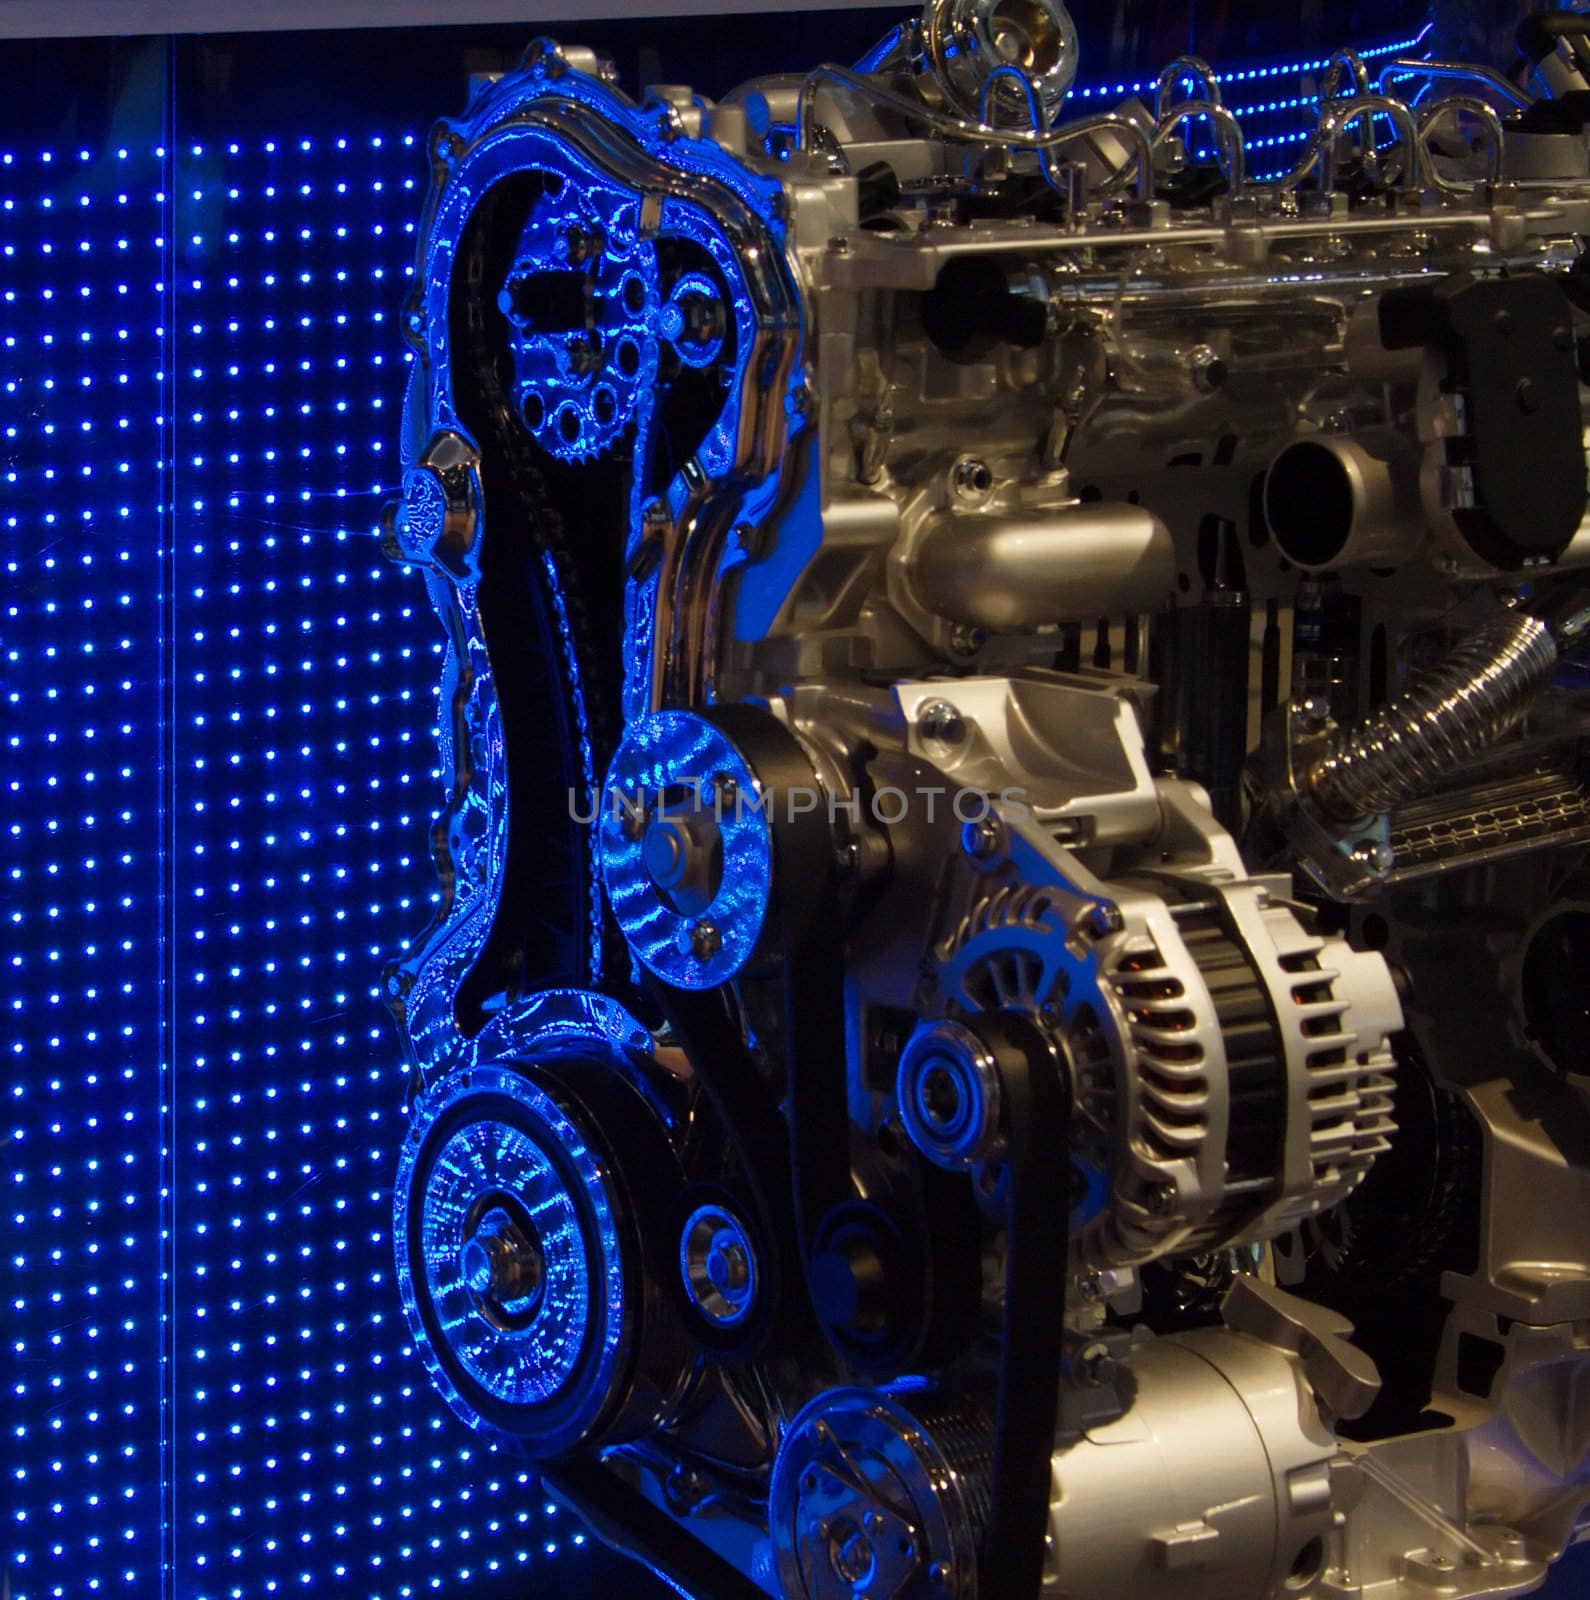 Cut out of motor engine, displayed in front of a blue LED wall